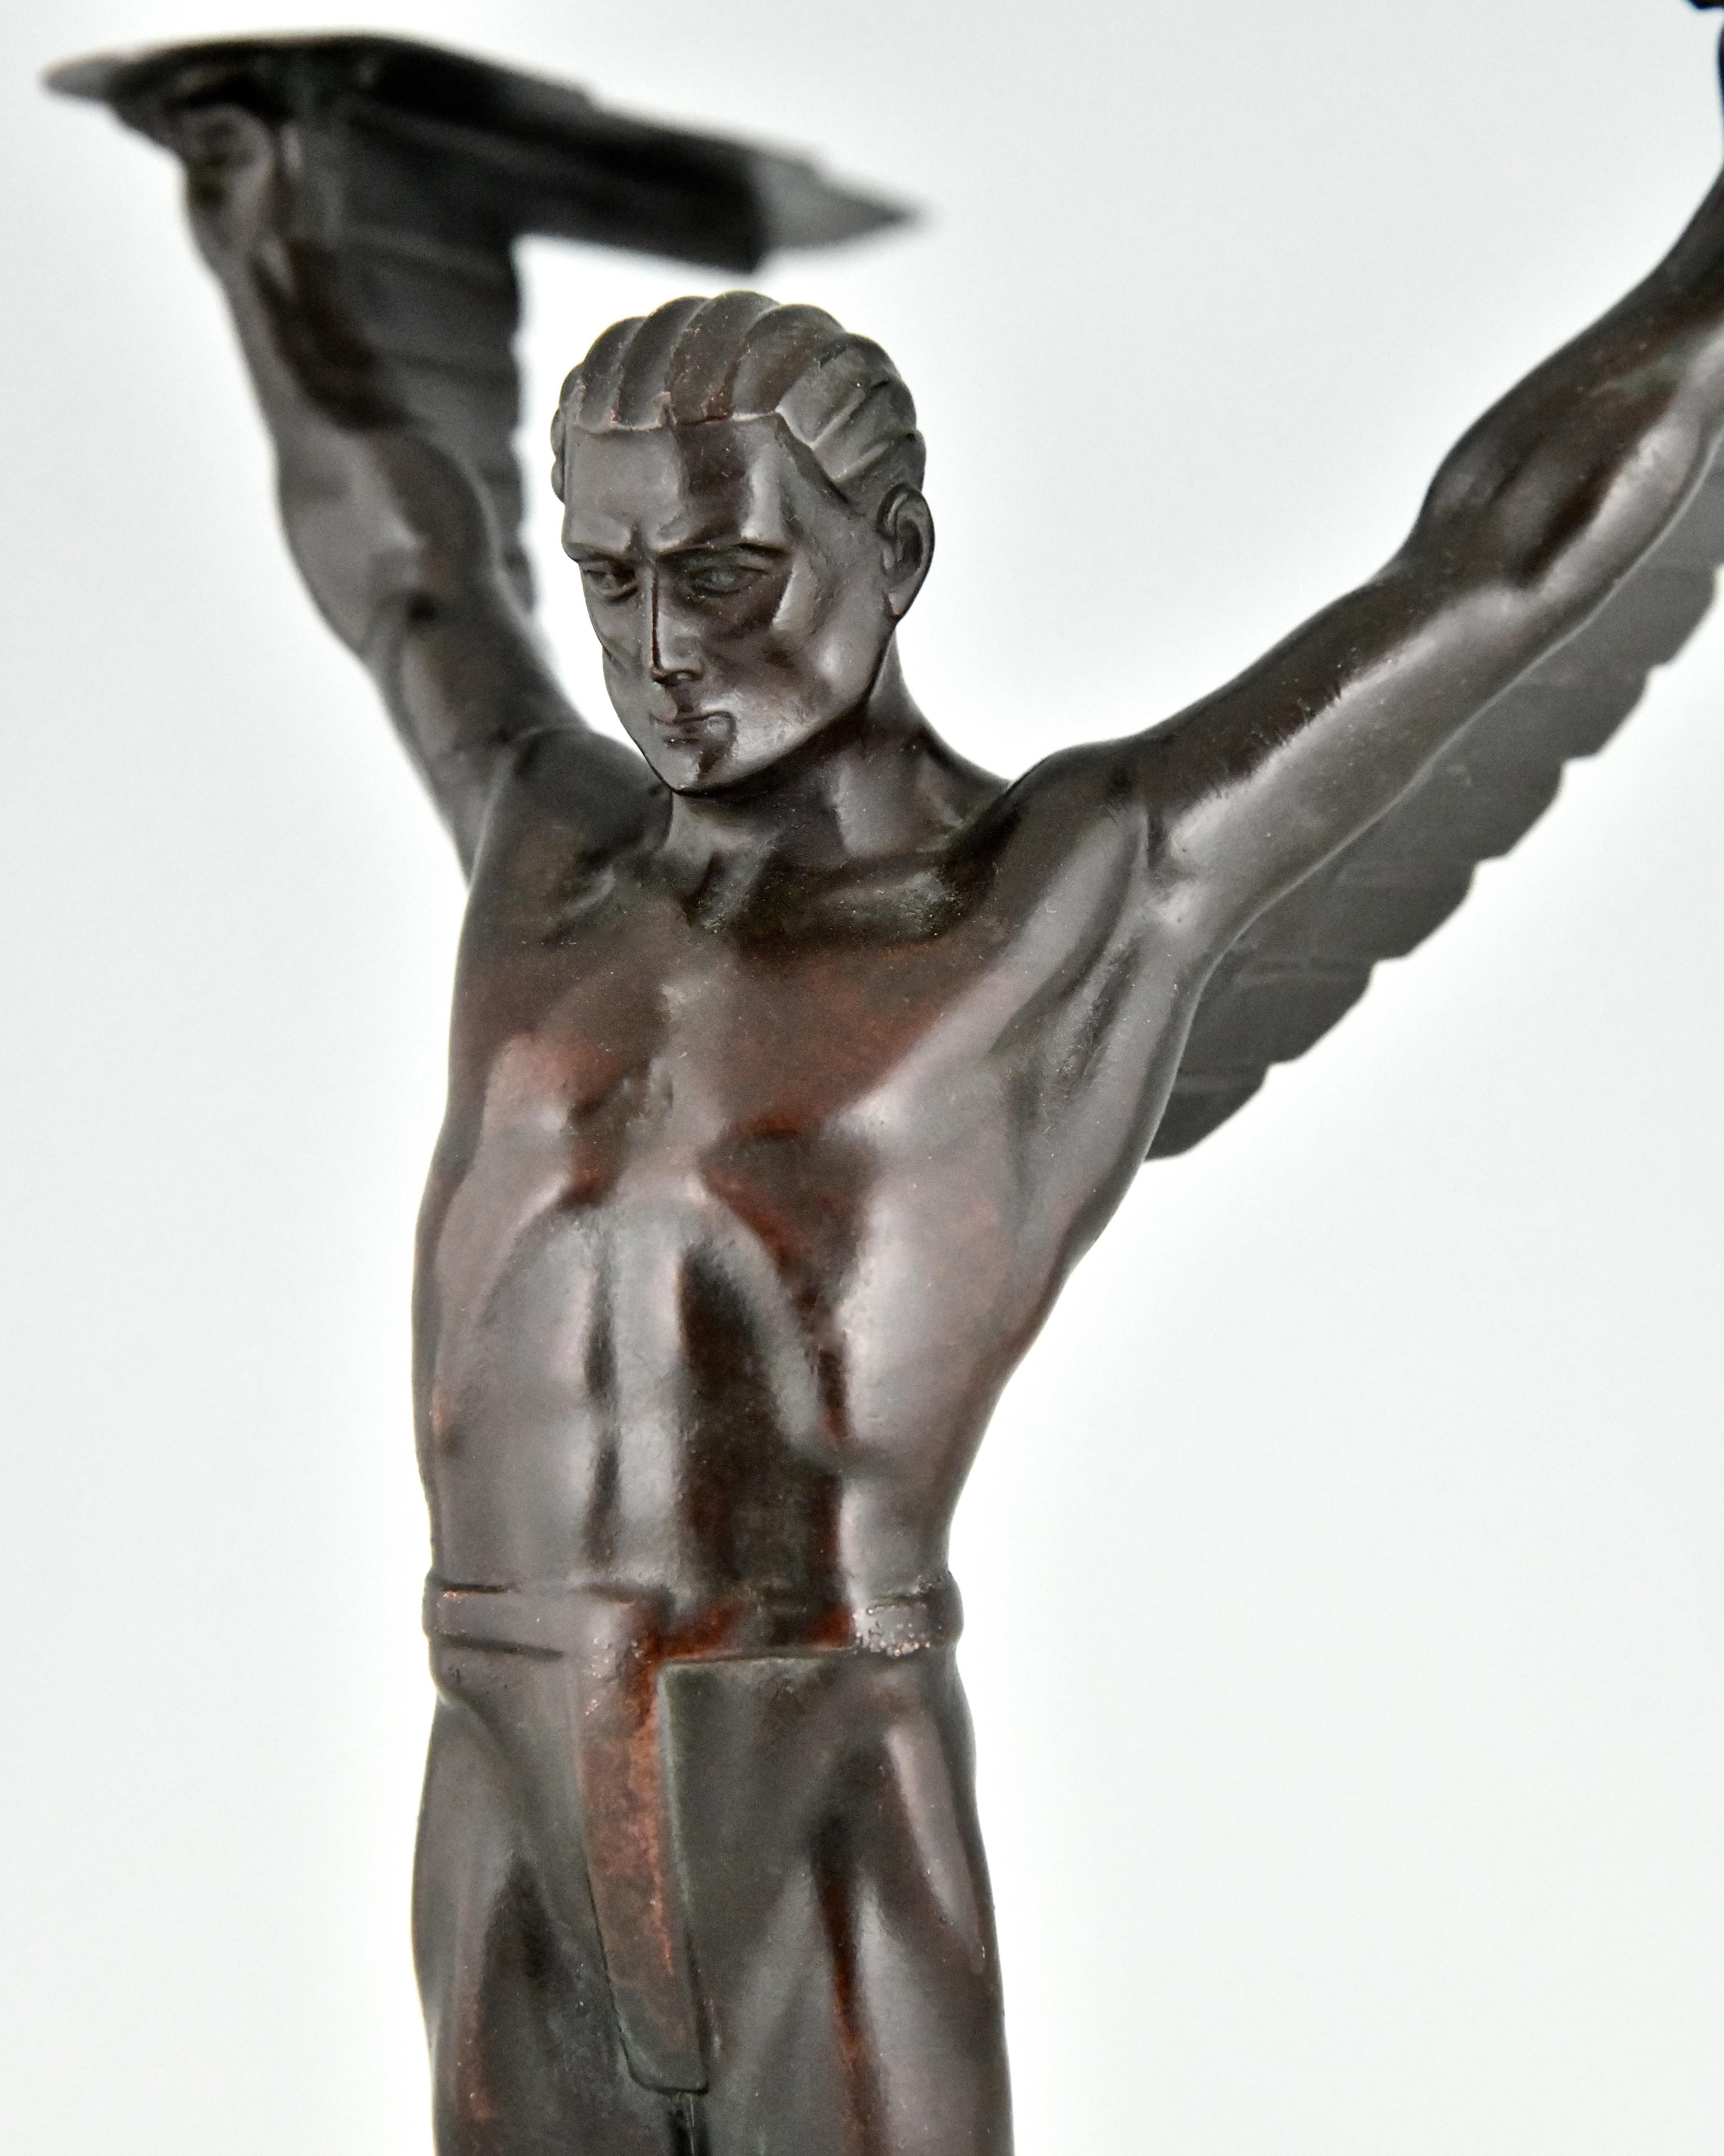 Icarus Art Deco Sculpture of a Winged Athlete in the Style of Schmidt Hofer 1